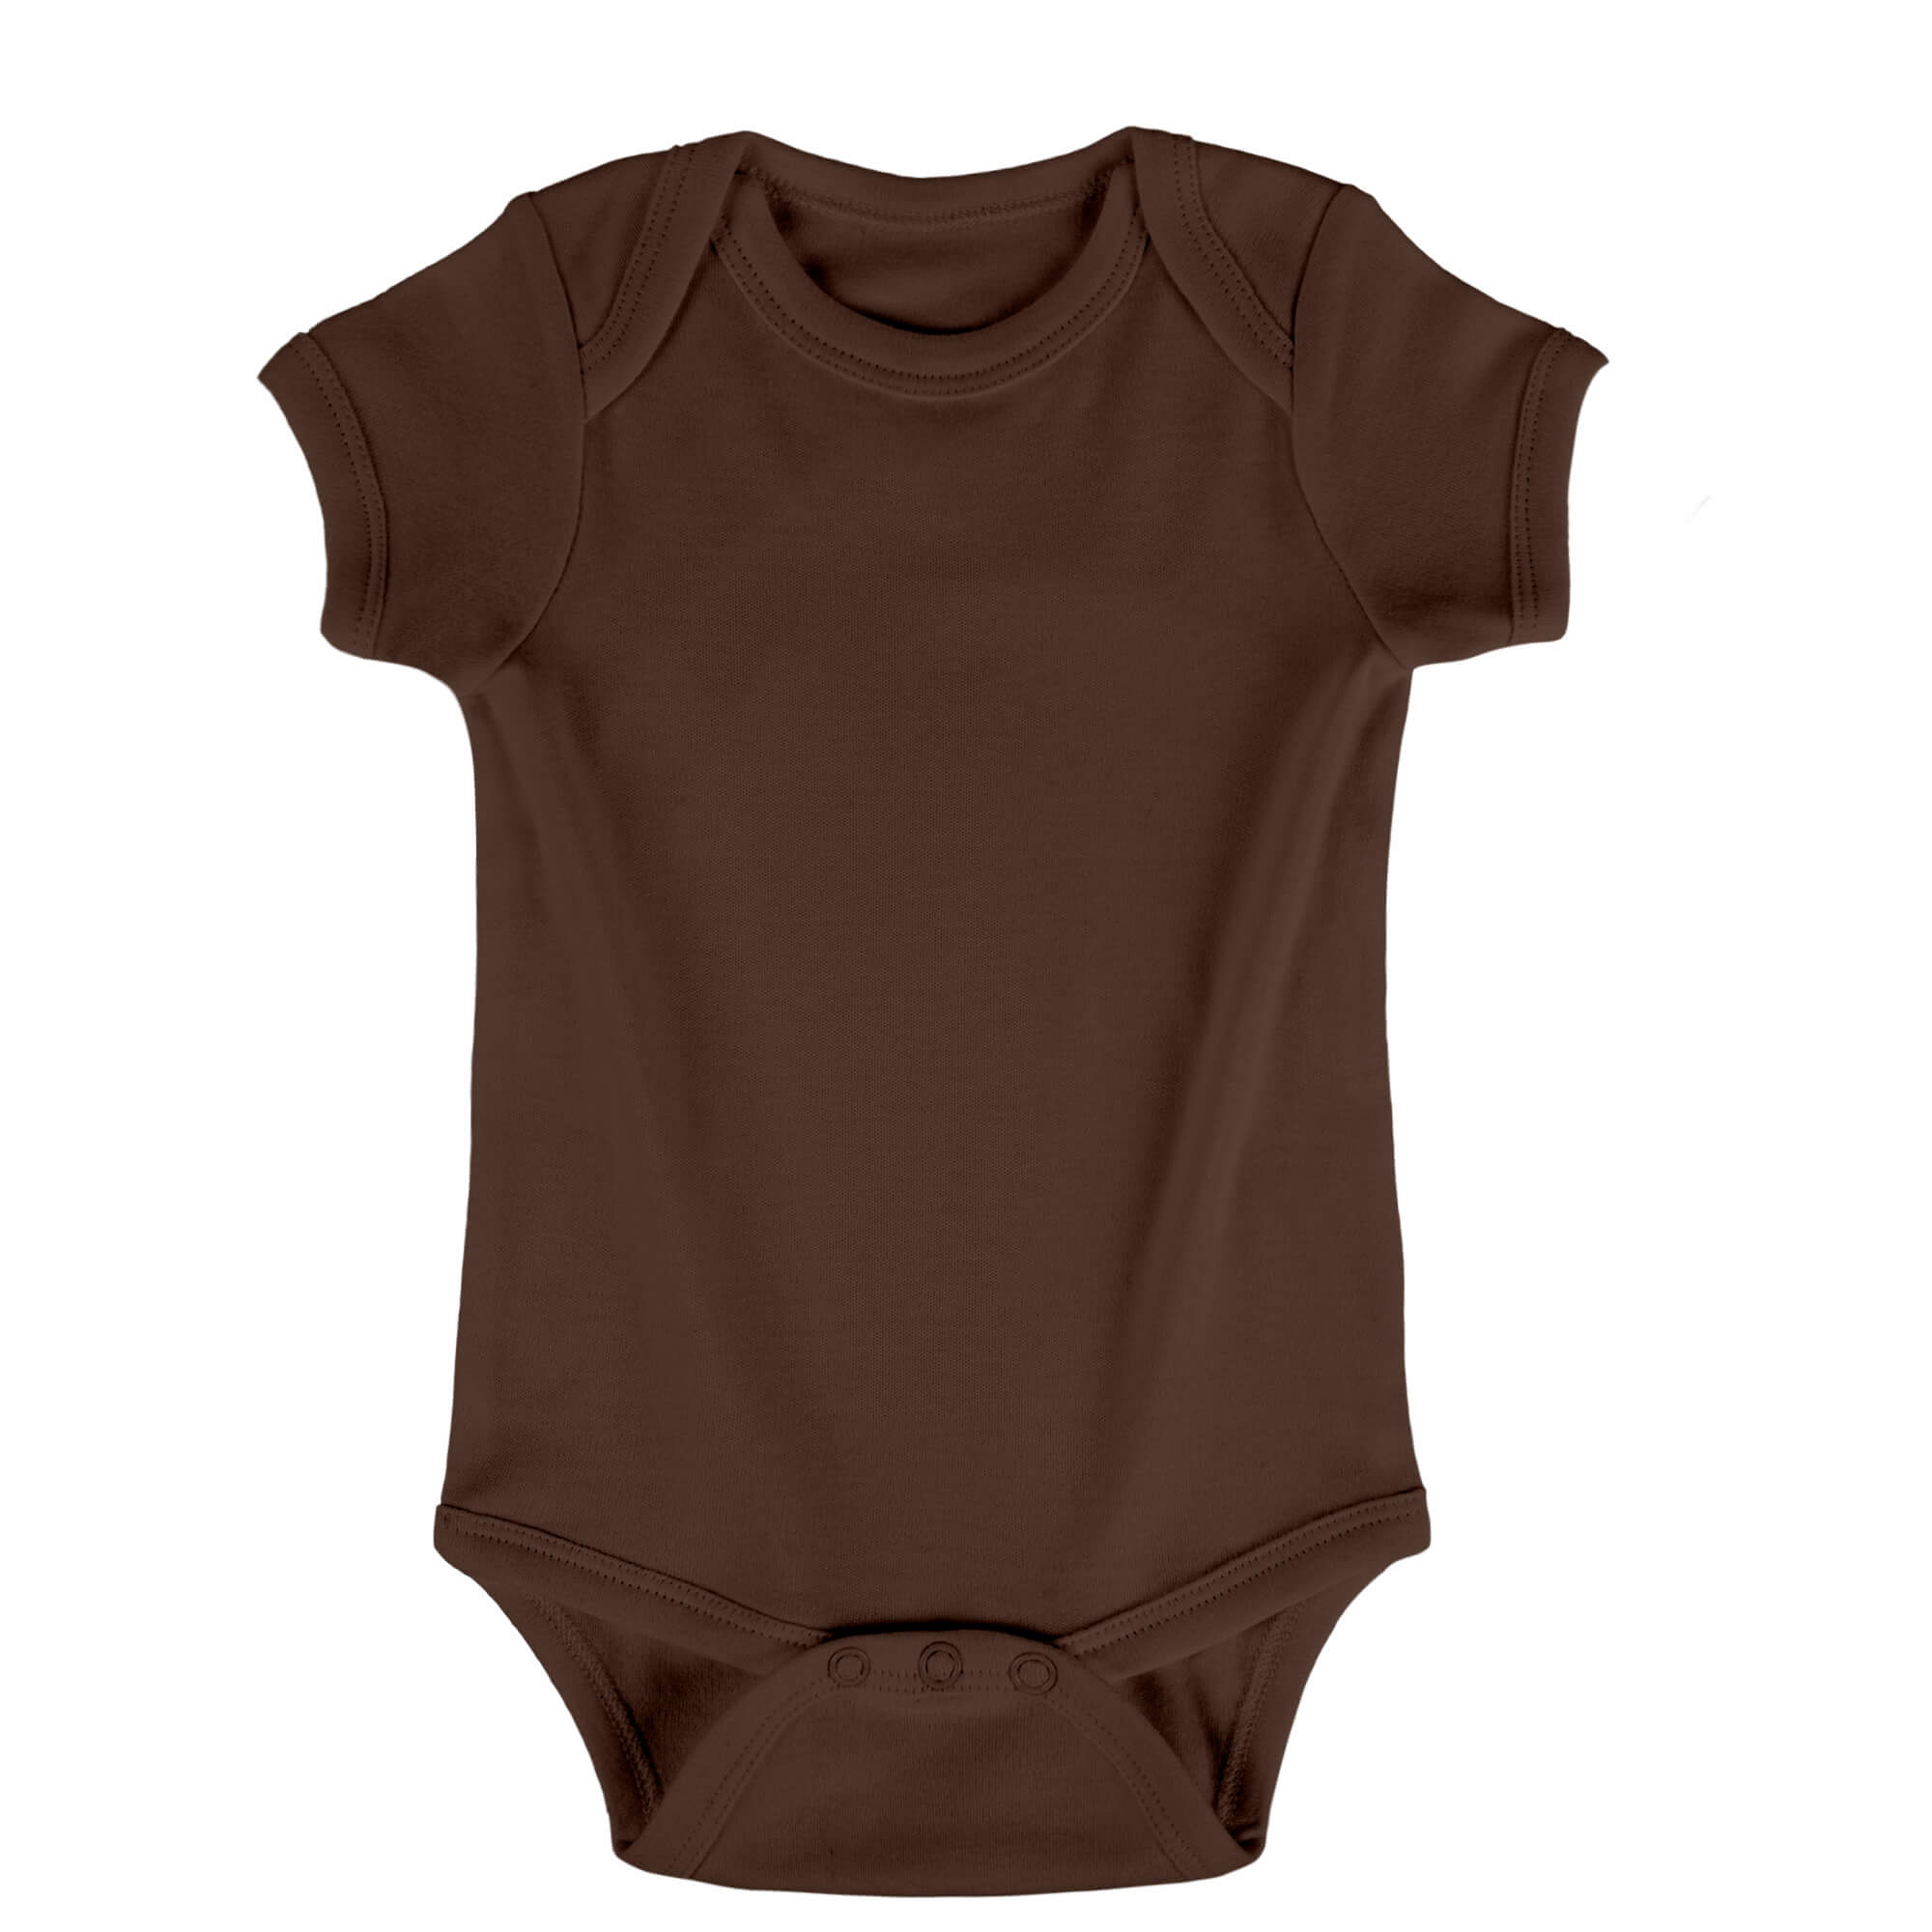 brown color number #46, onesie color selection, and color display.